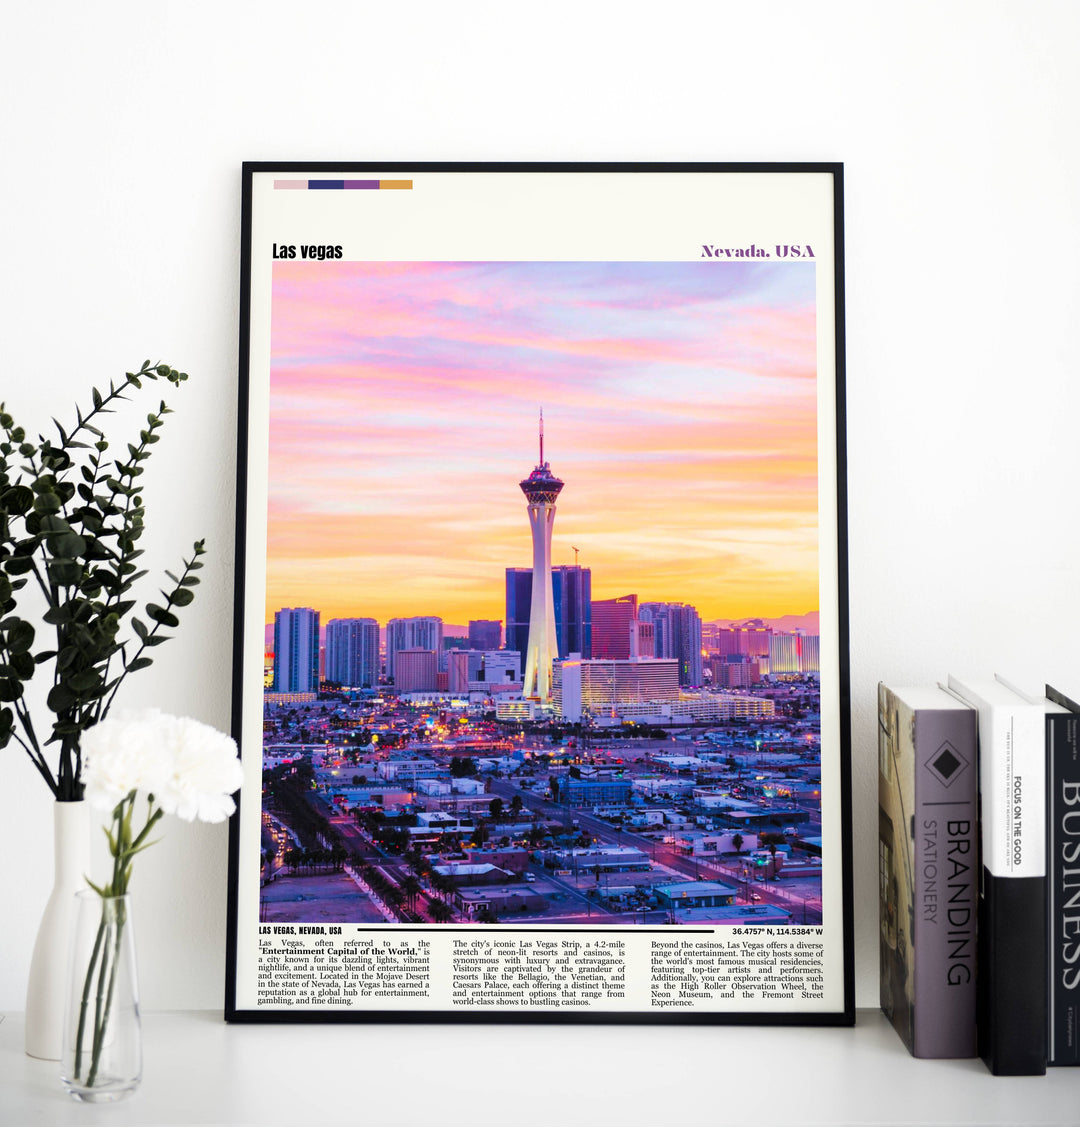 Las Vegas Poster Art provides a stunning representation of the citys essence, capturing the heart and soul of Las Vegas in a visually captivating manner.